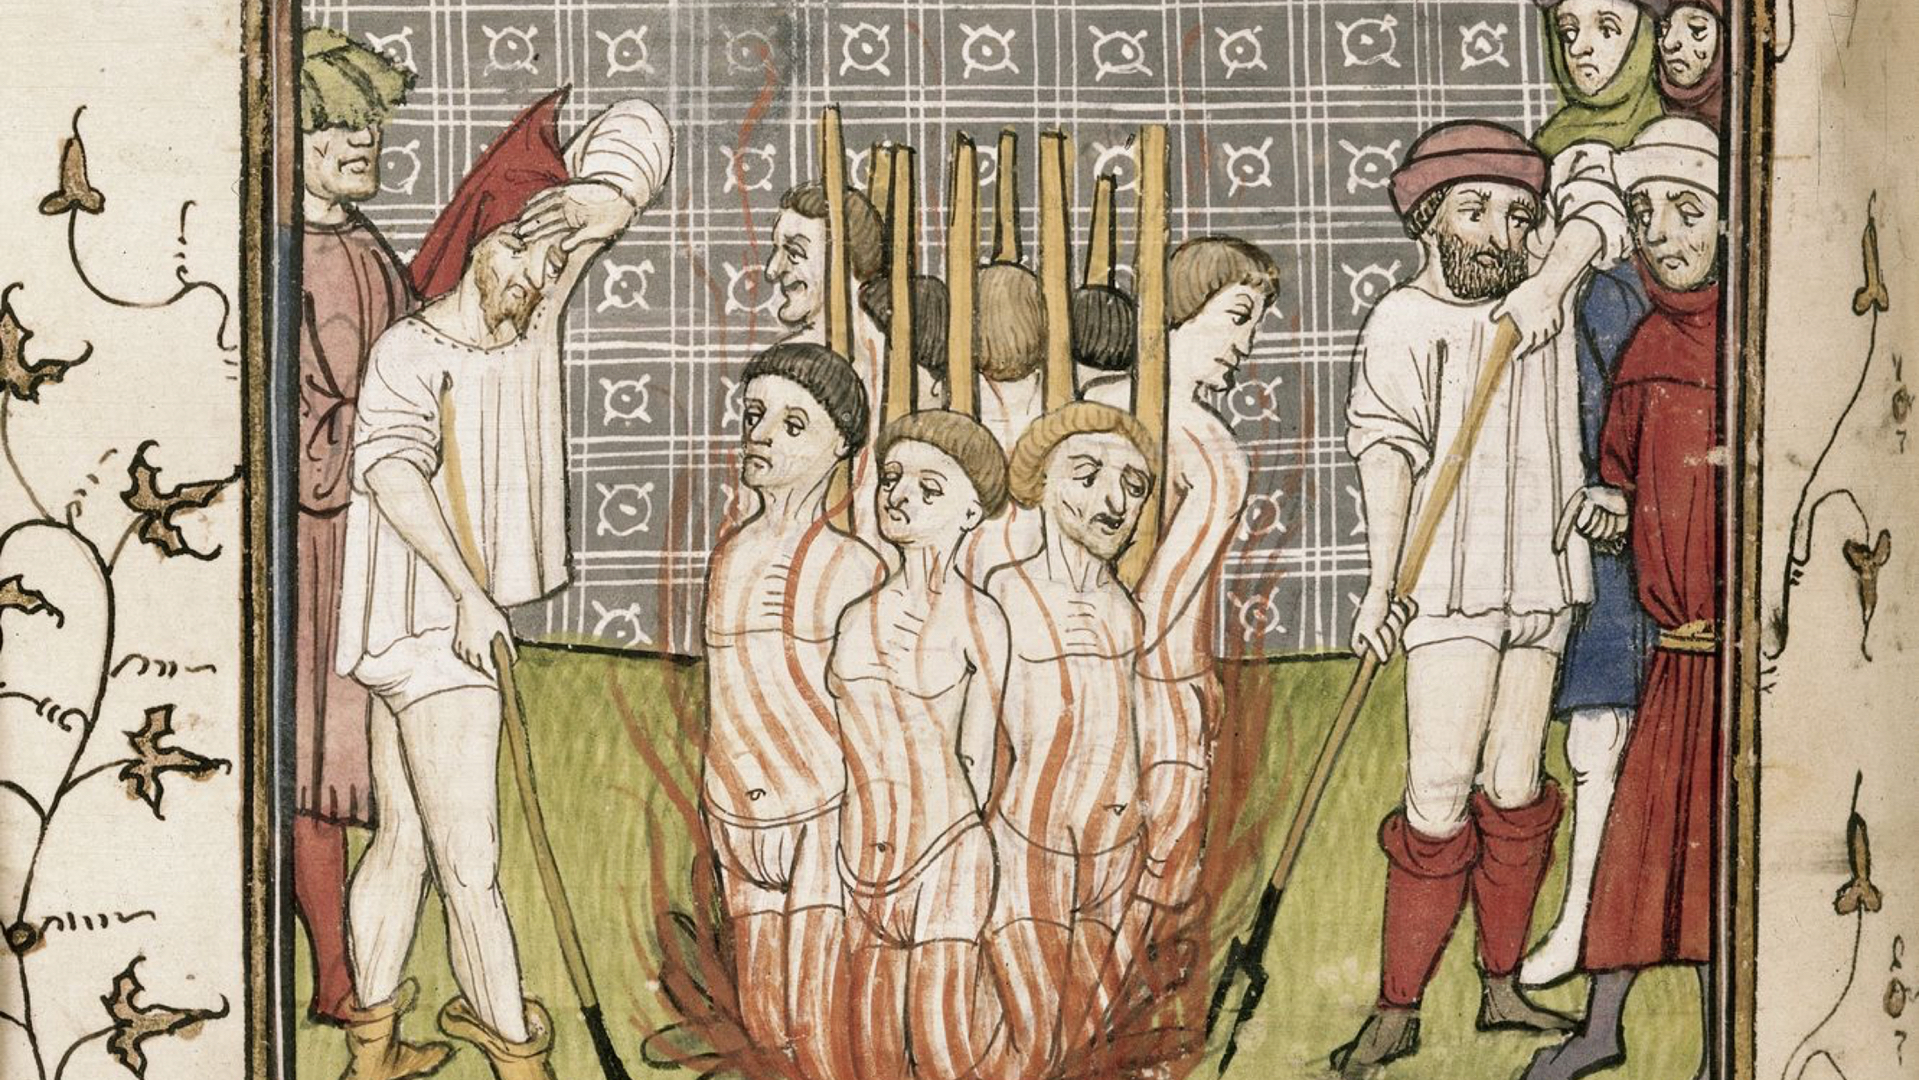 Consumed by flames  The Last Grand-Master of the Knights Templar